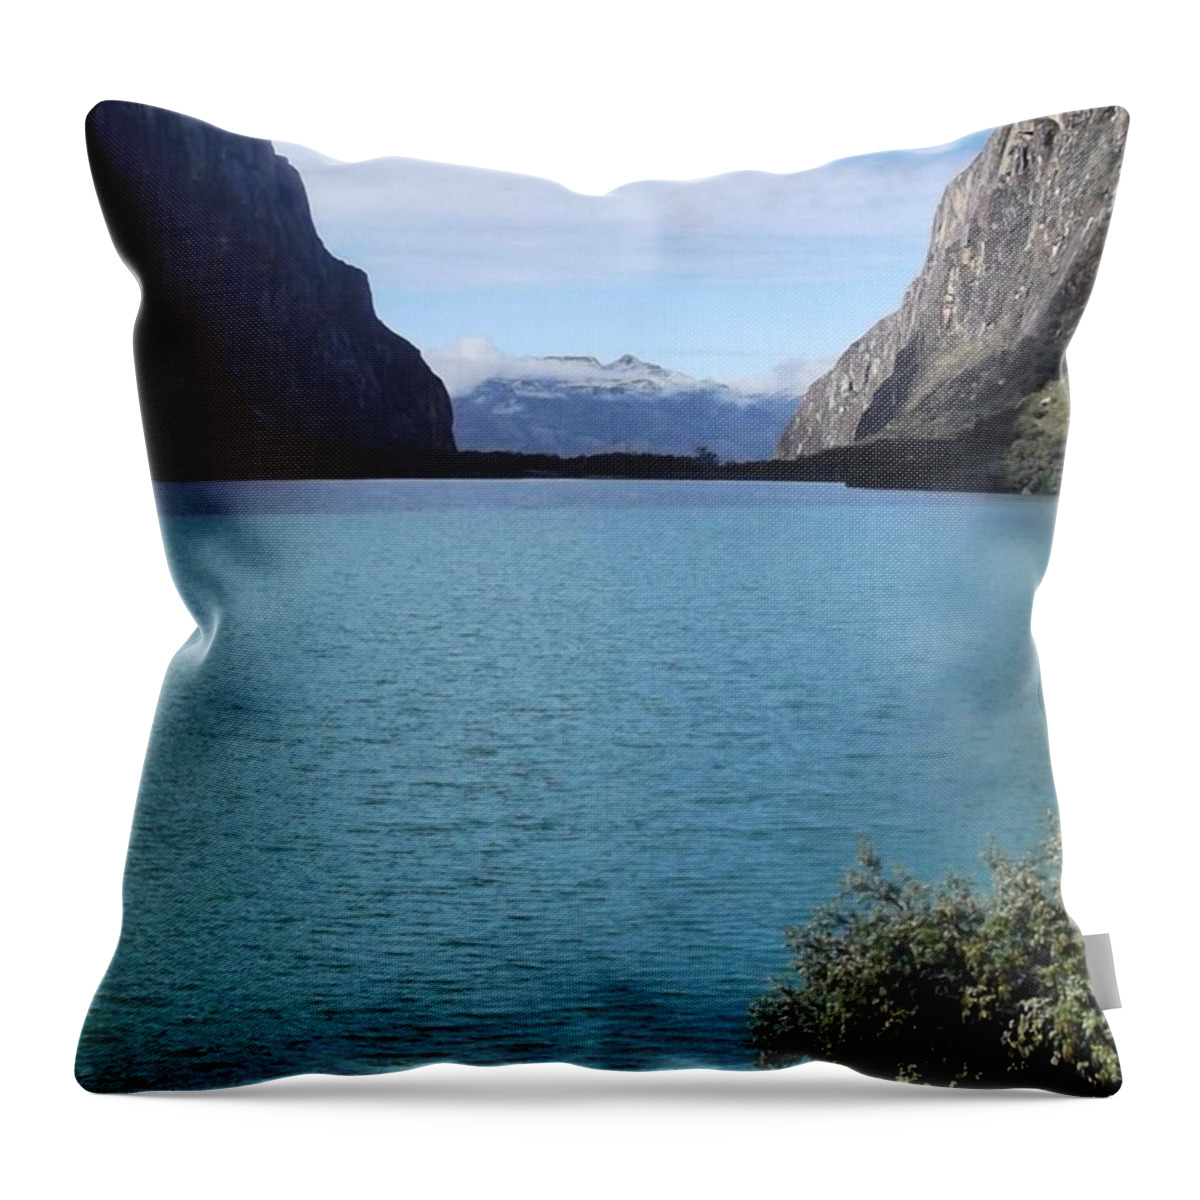 Mountains Throw Pillow featuring the photograph Amazing Lake Up In The Mountains Of The by Charlotte Cooper